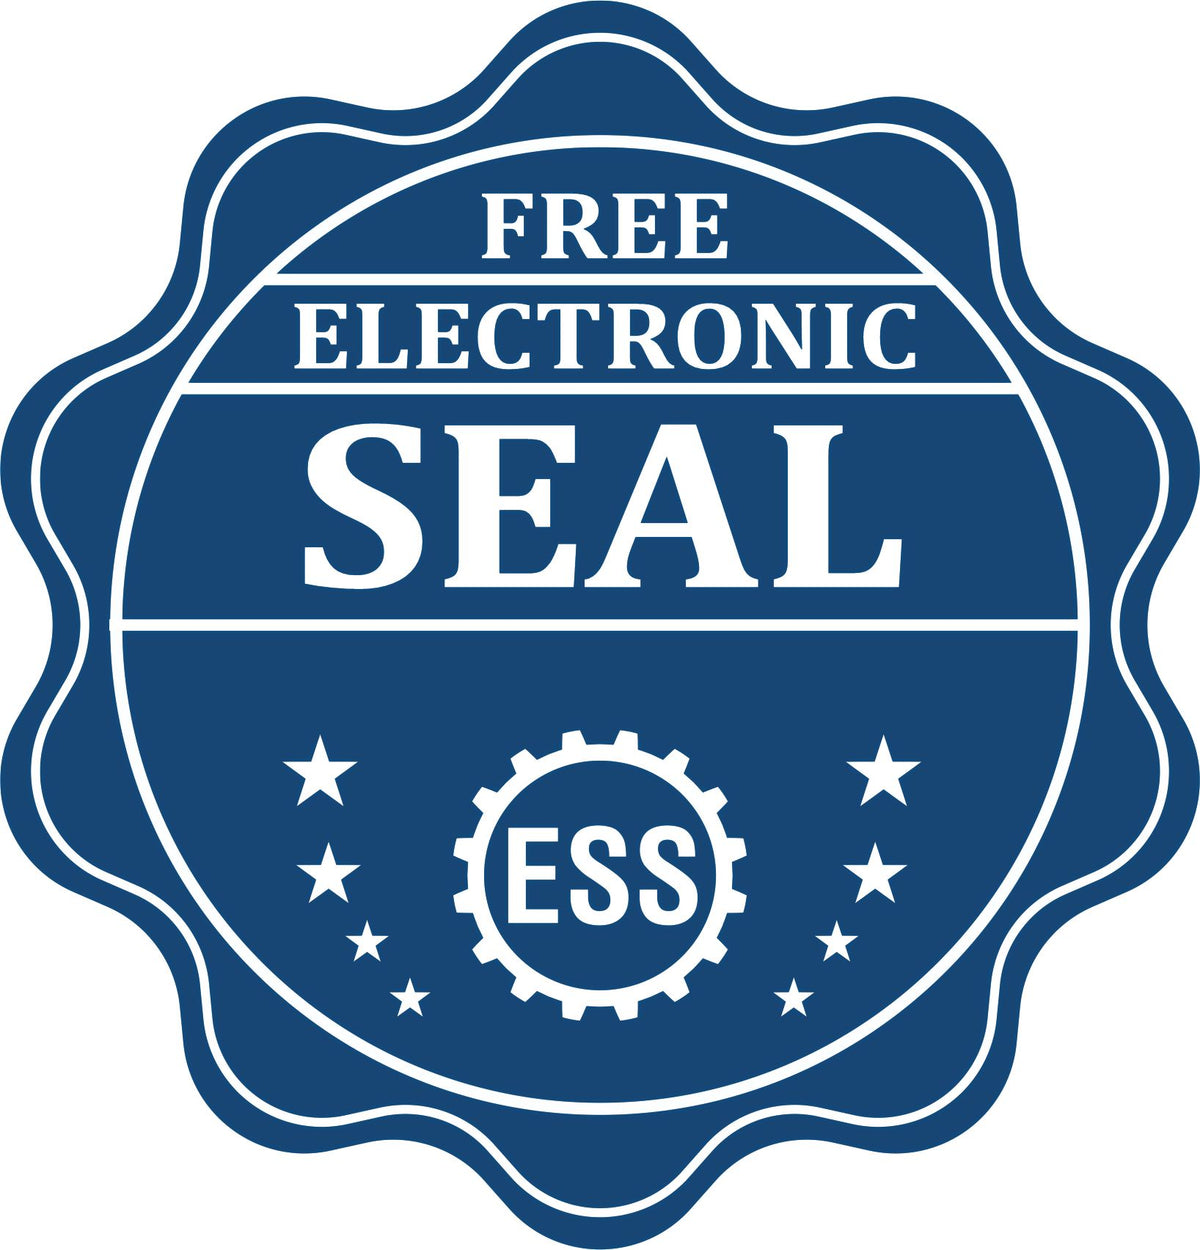 A badge showing a free electronic seal for the Soft Iowa Professional Engineer Seal with stars and the ESS gear on the emblem.